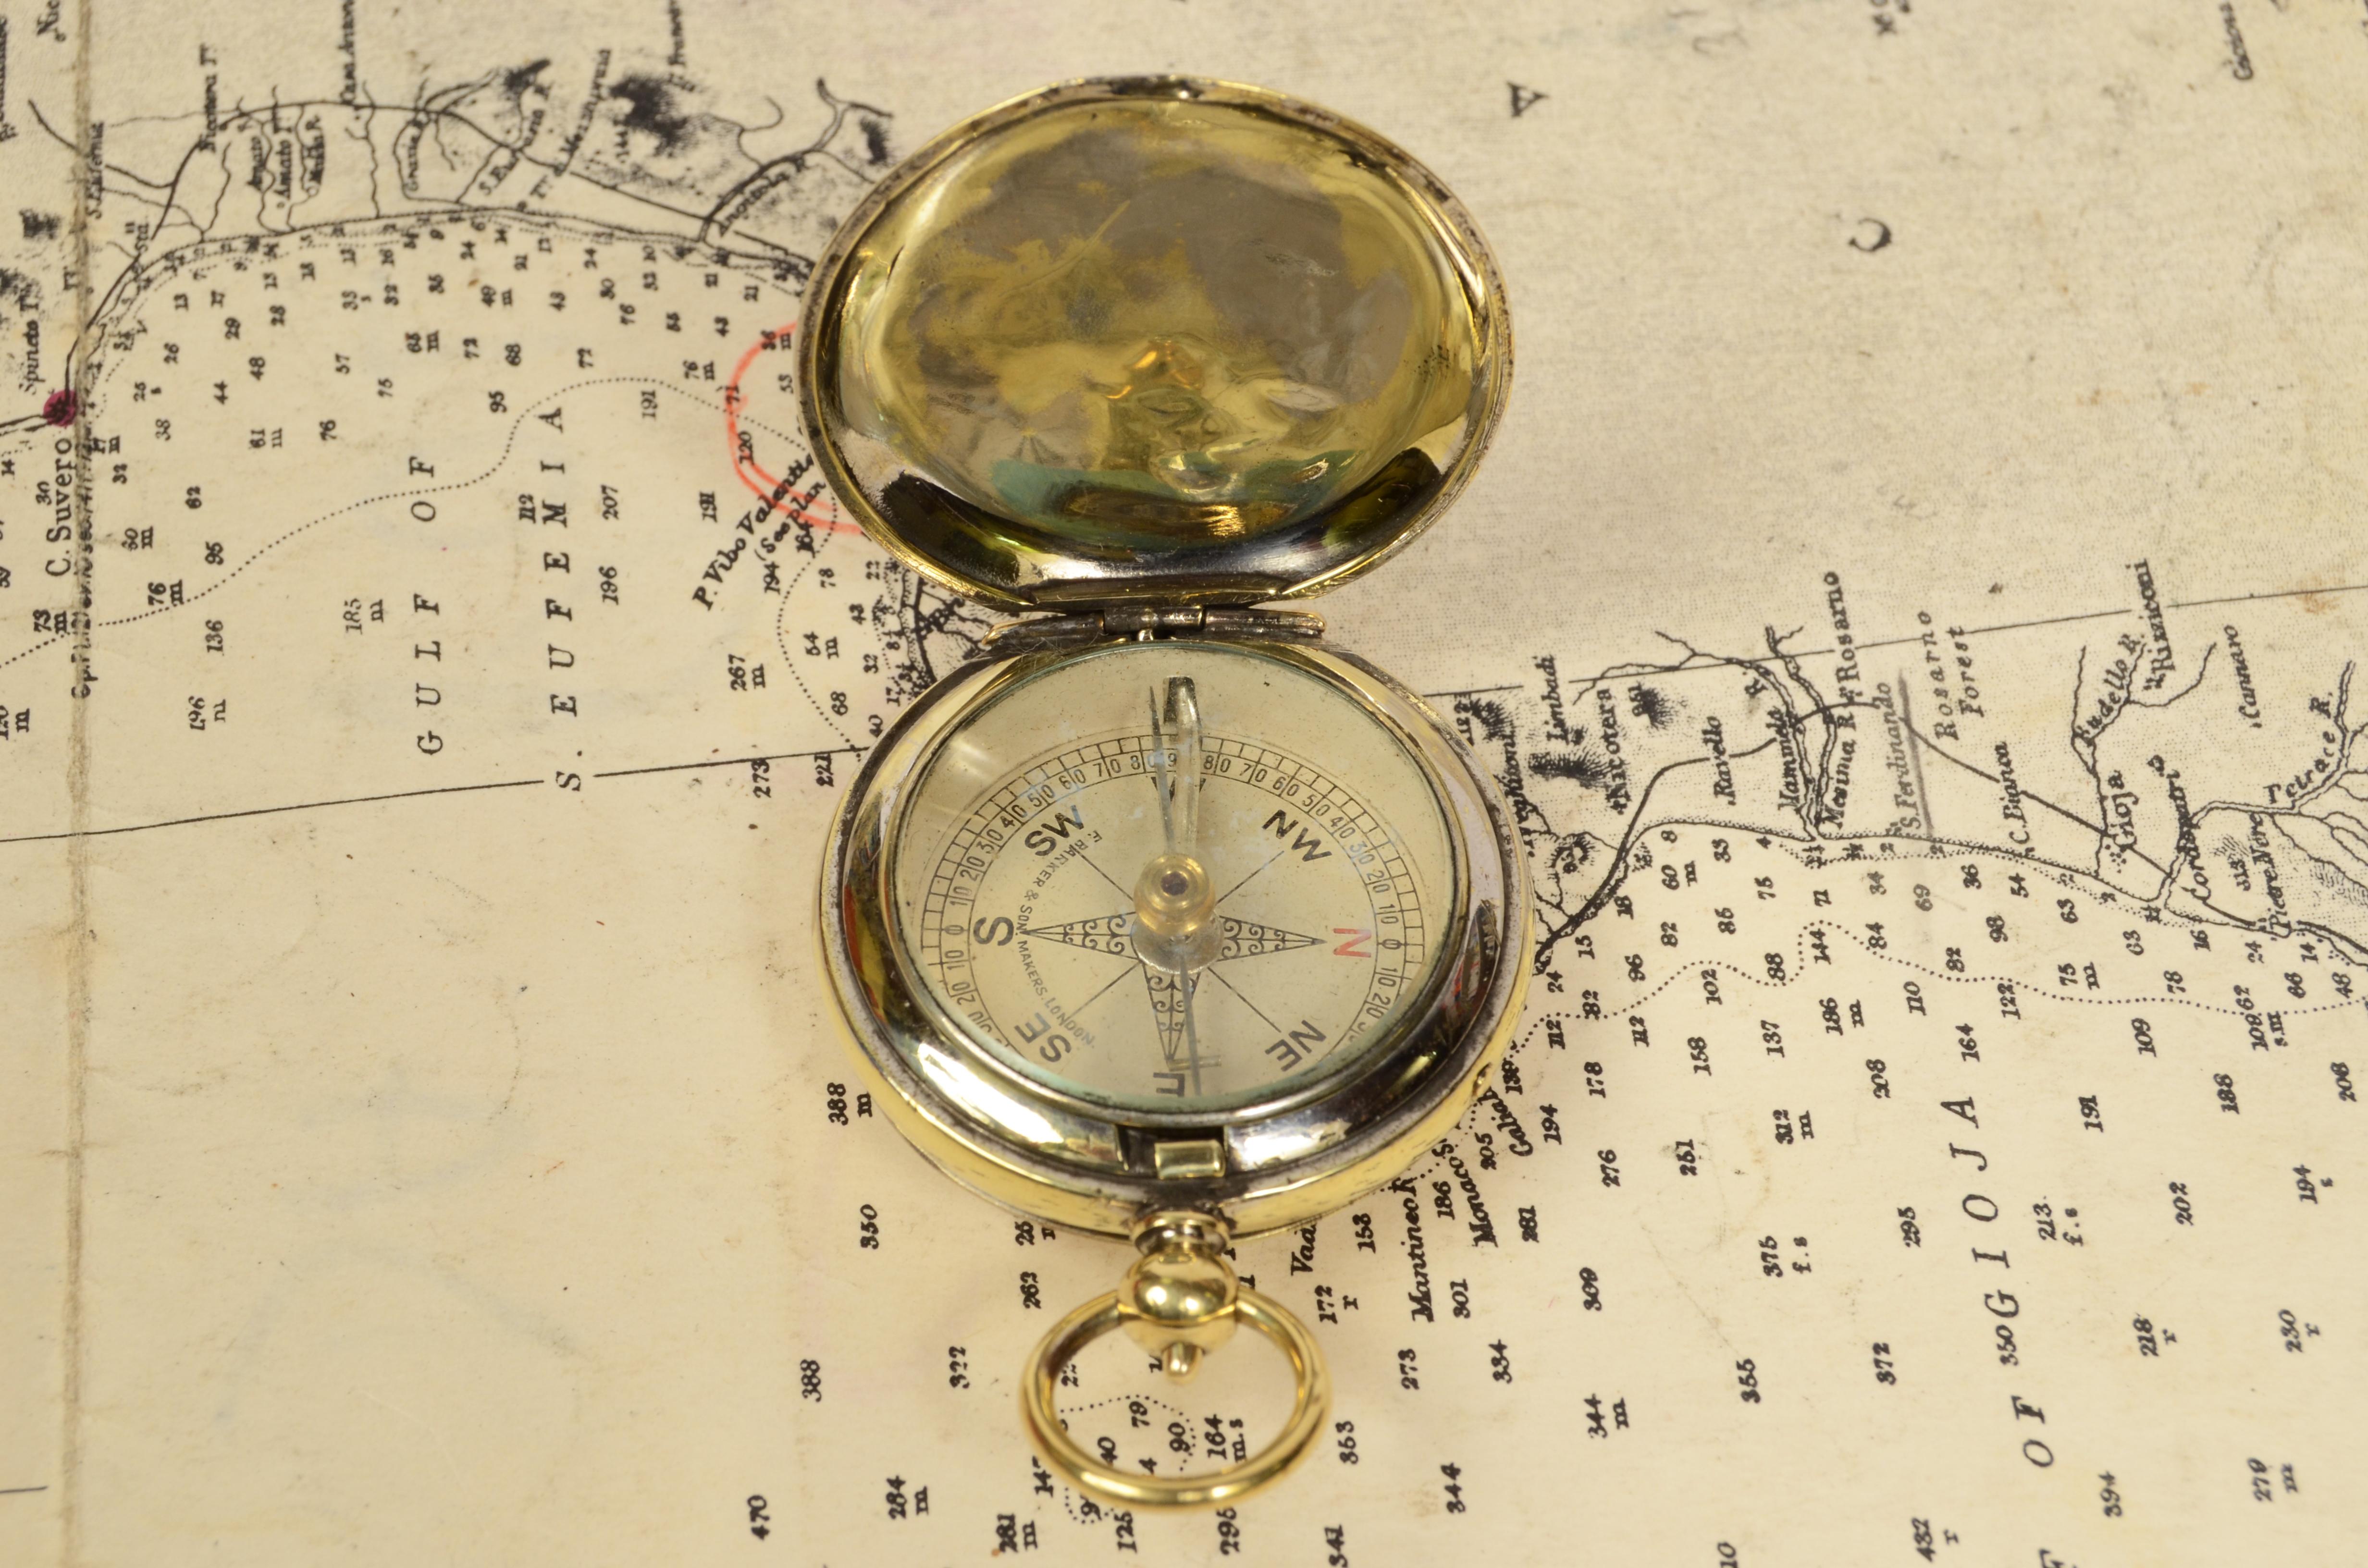 1920s Brass pocket compass in the shape of a pocket watch, and equipped with a lid with snap closure with release button inside the ring. Four-winds compass card complete with goniometric circle for calculating horizontal angles. Good condition,